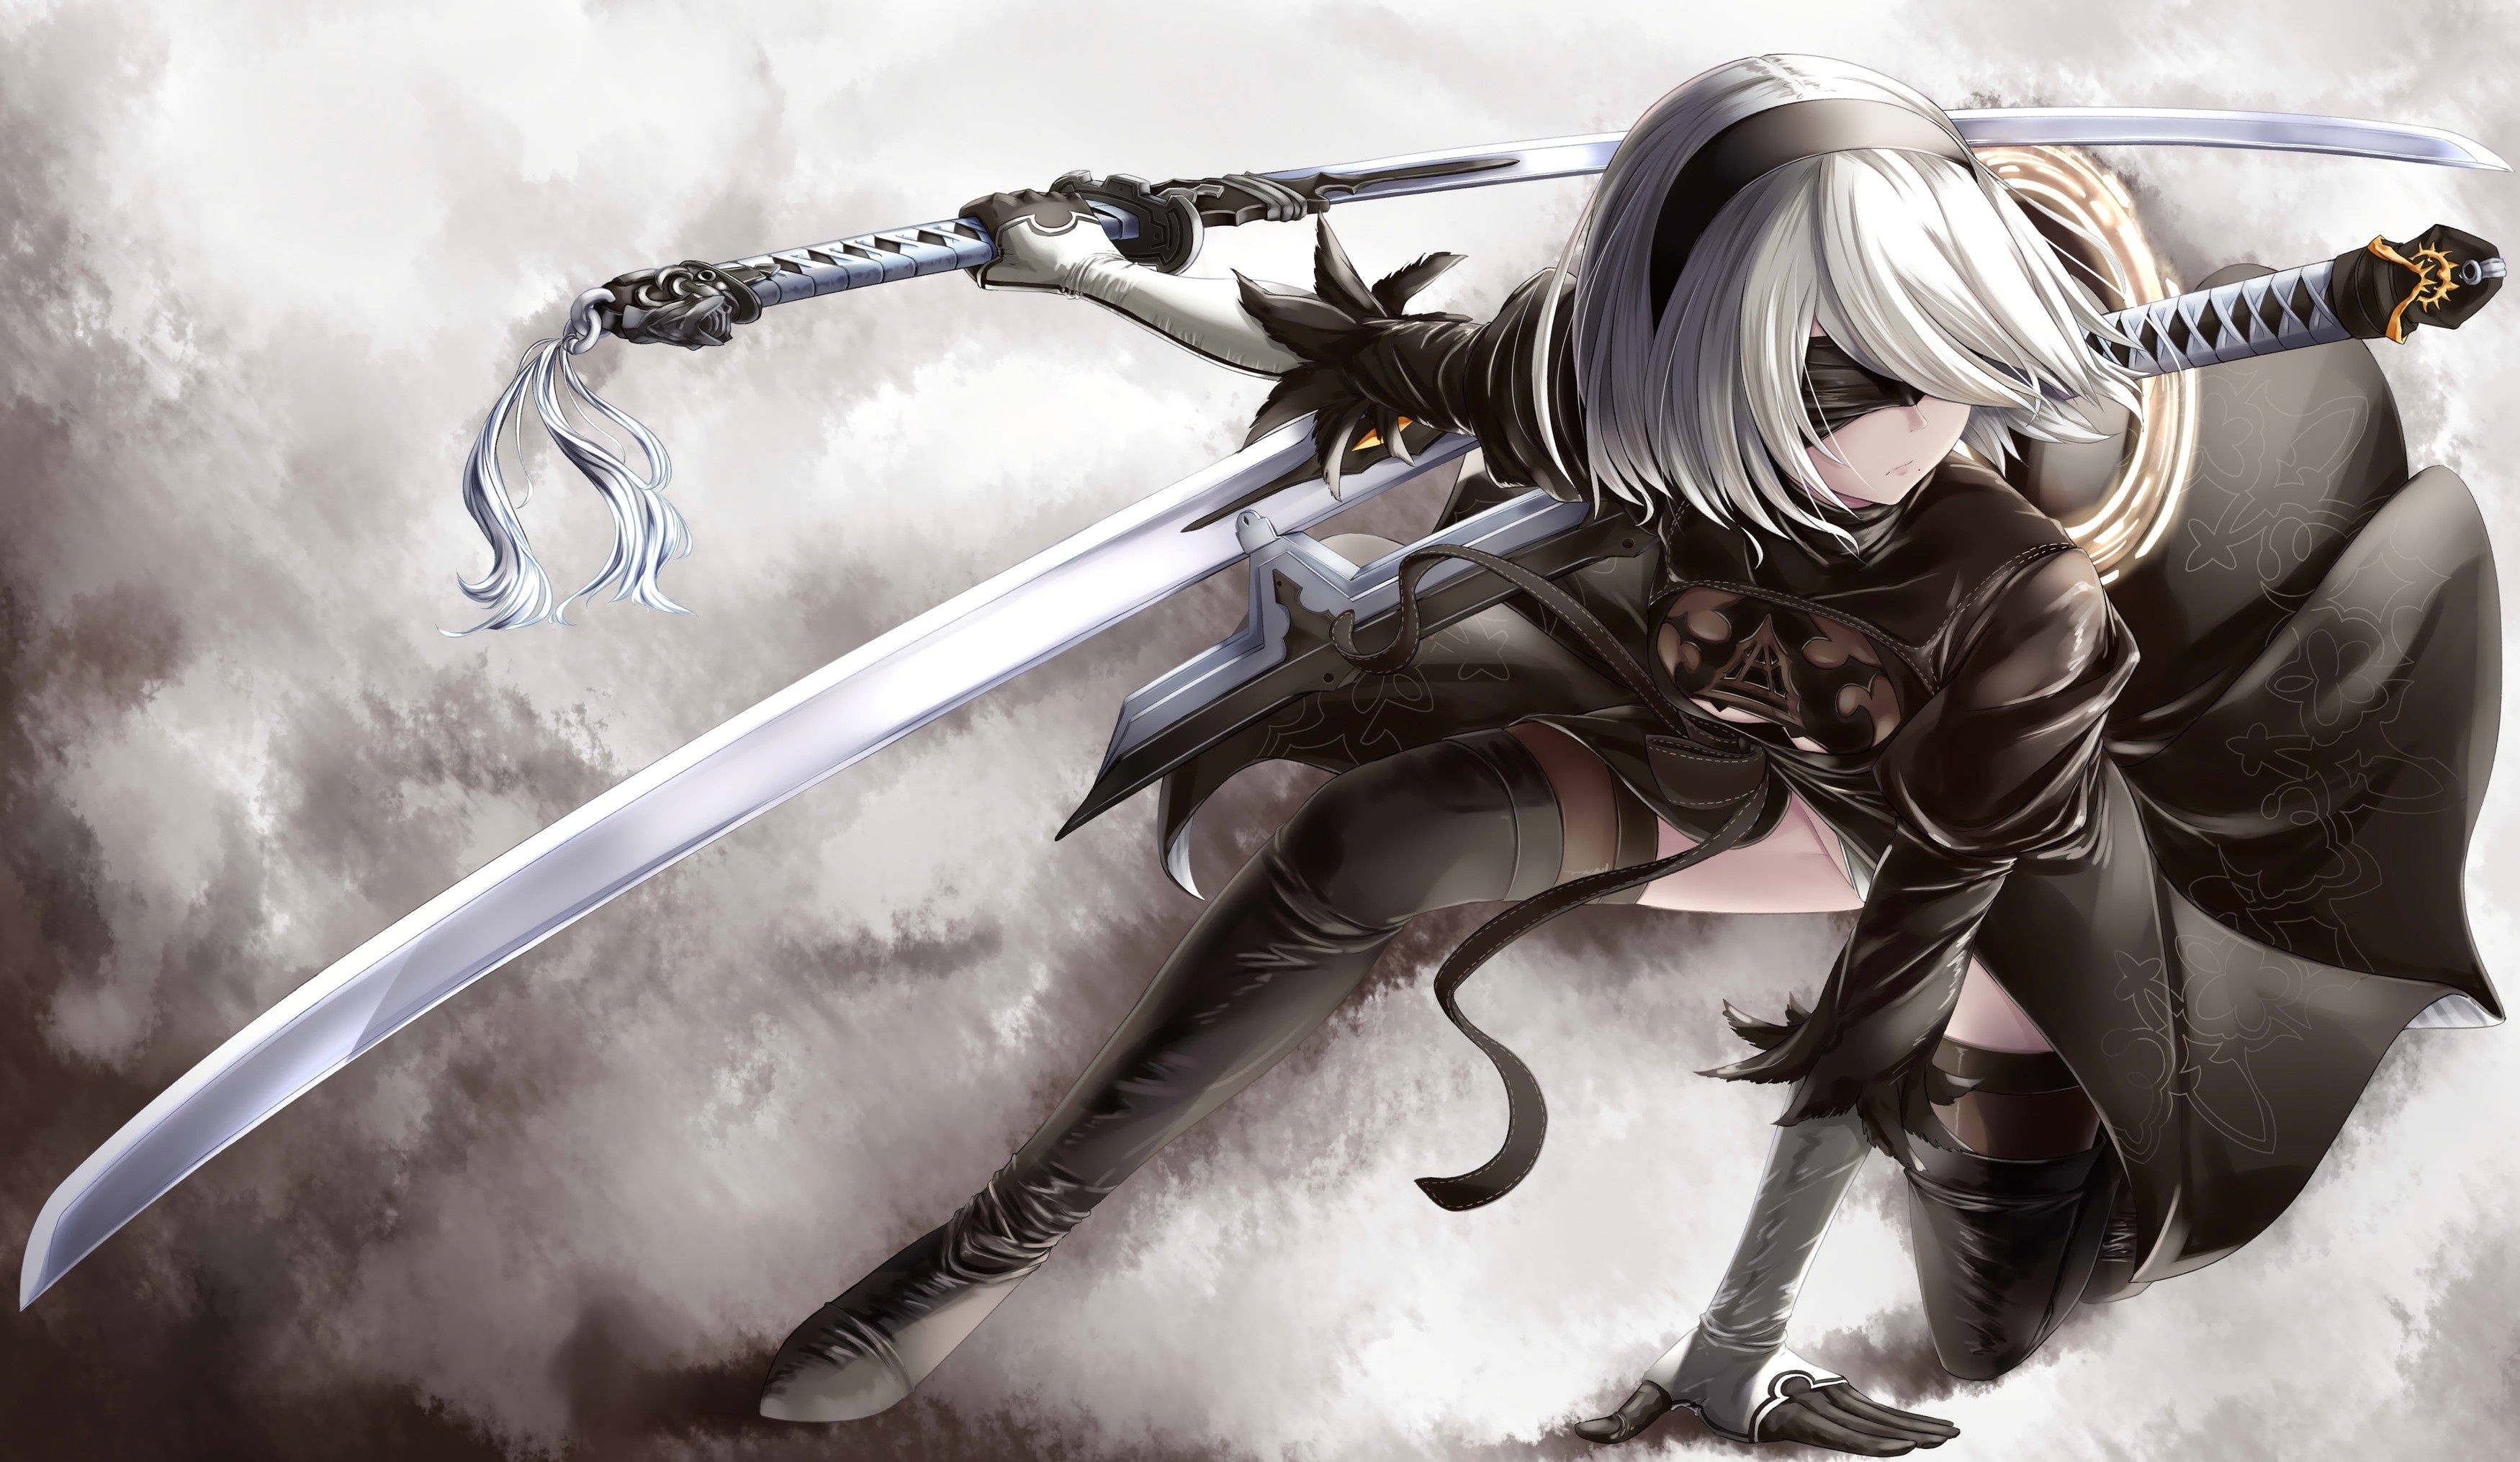 10 Most Popular Nier Automata Wallpaper 2B FULL HD 1920×1080 For PC Background